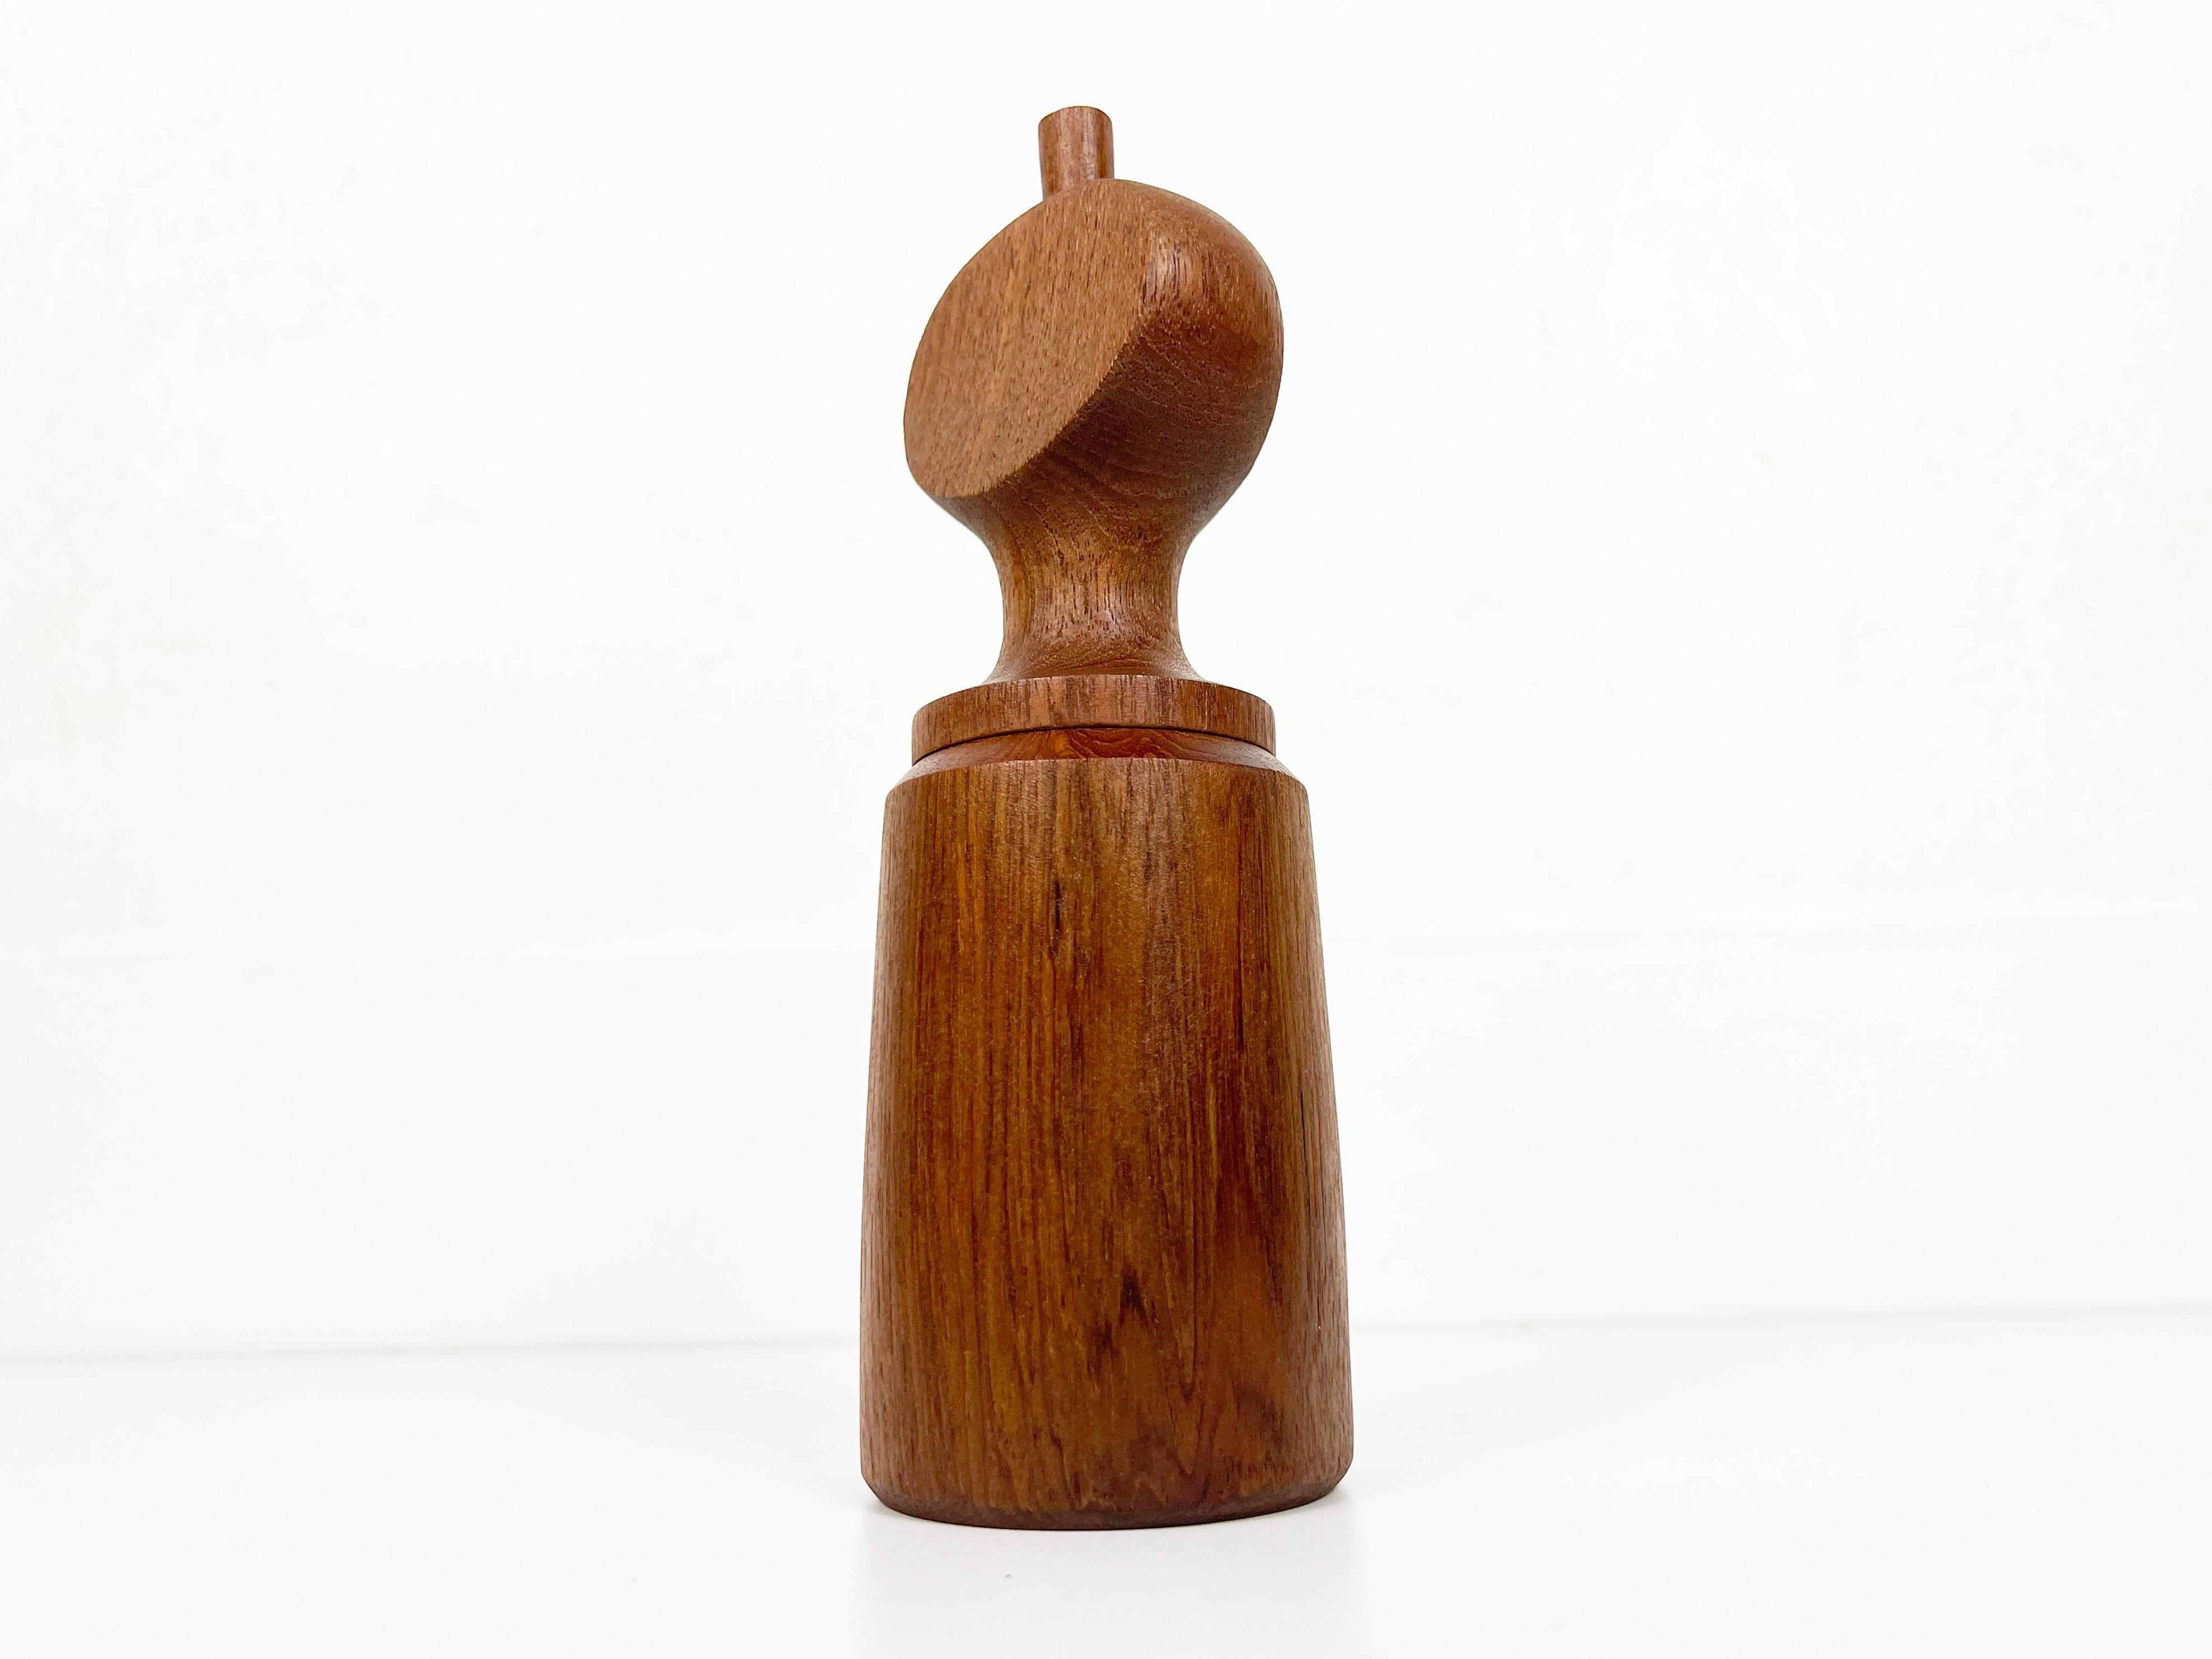 Vintage salt and pepper mill designed by renowned Scandinavian designer Jens Quistgaard for Dansk. Crafted from premium quality teak wood, this salt and pepper mill showcases Quistgaard's signature mid-century modern design with clean lines and